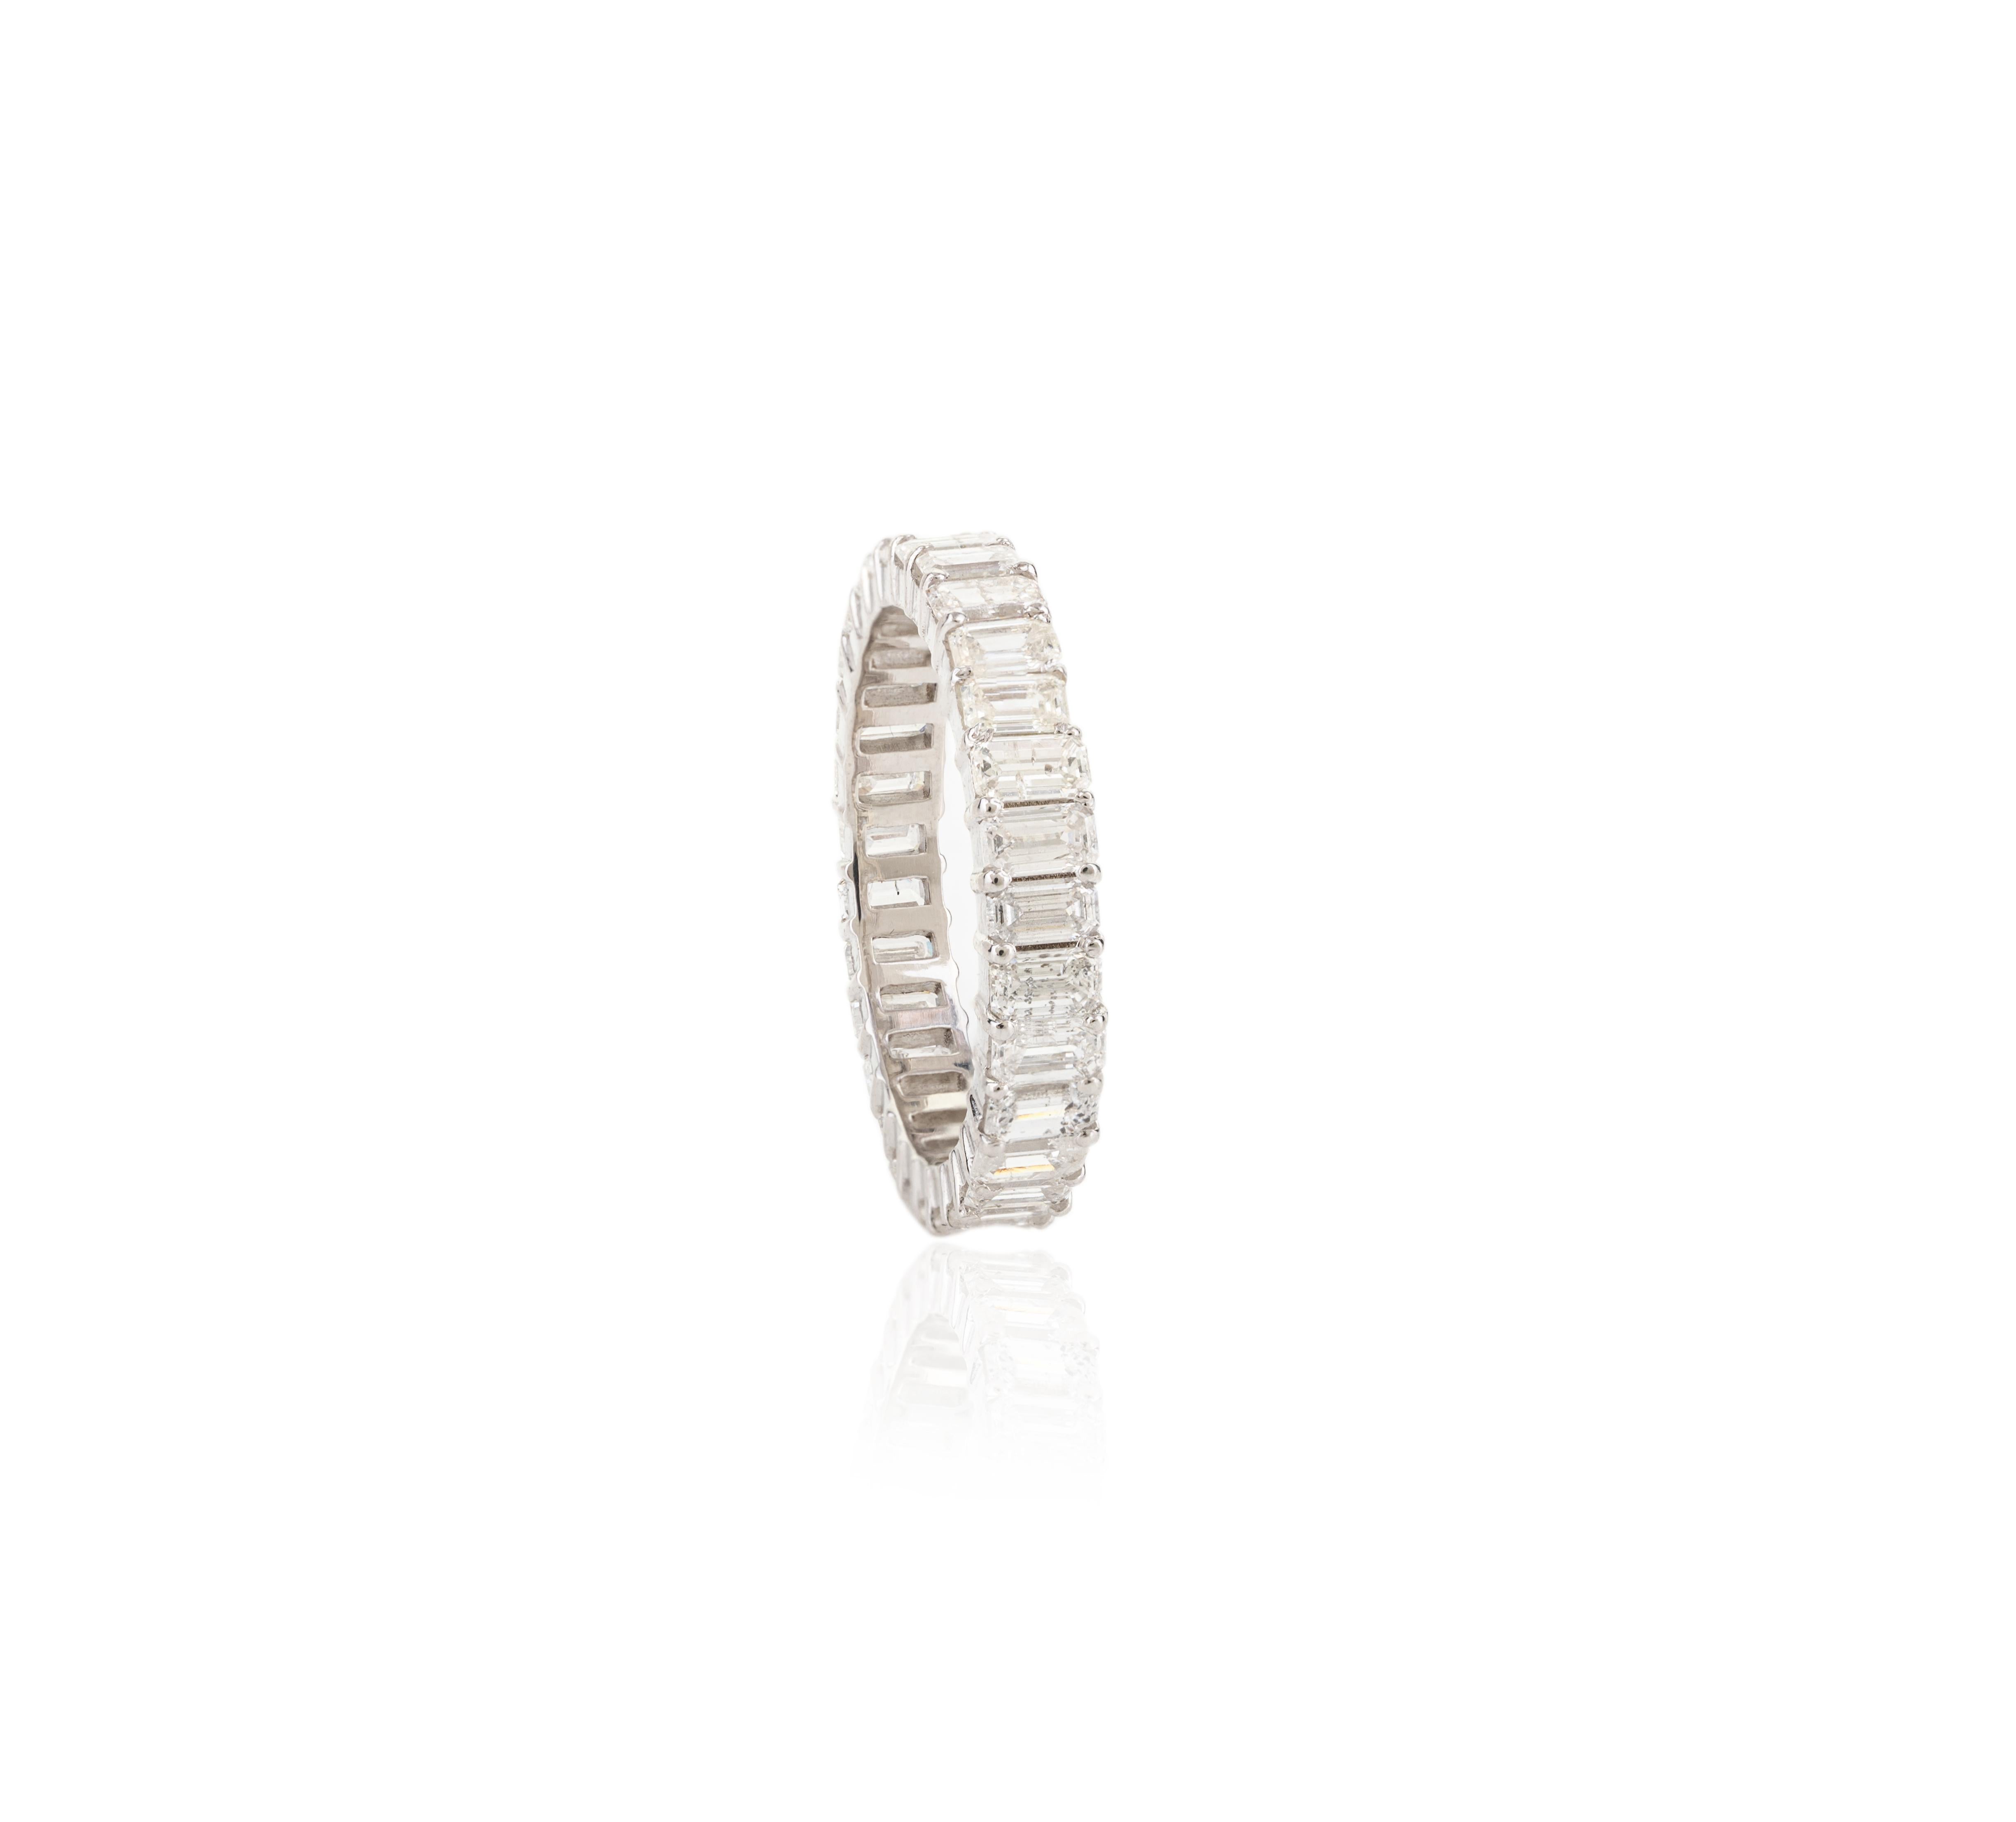 For Sale:  2.86 Carat Emerald Cut Diamond Eternity Band Ring in 14k Solid White Gold 5